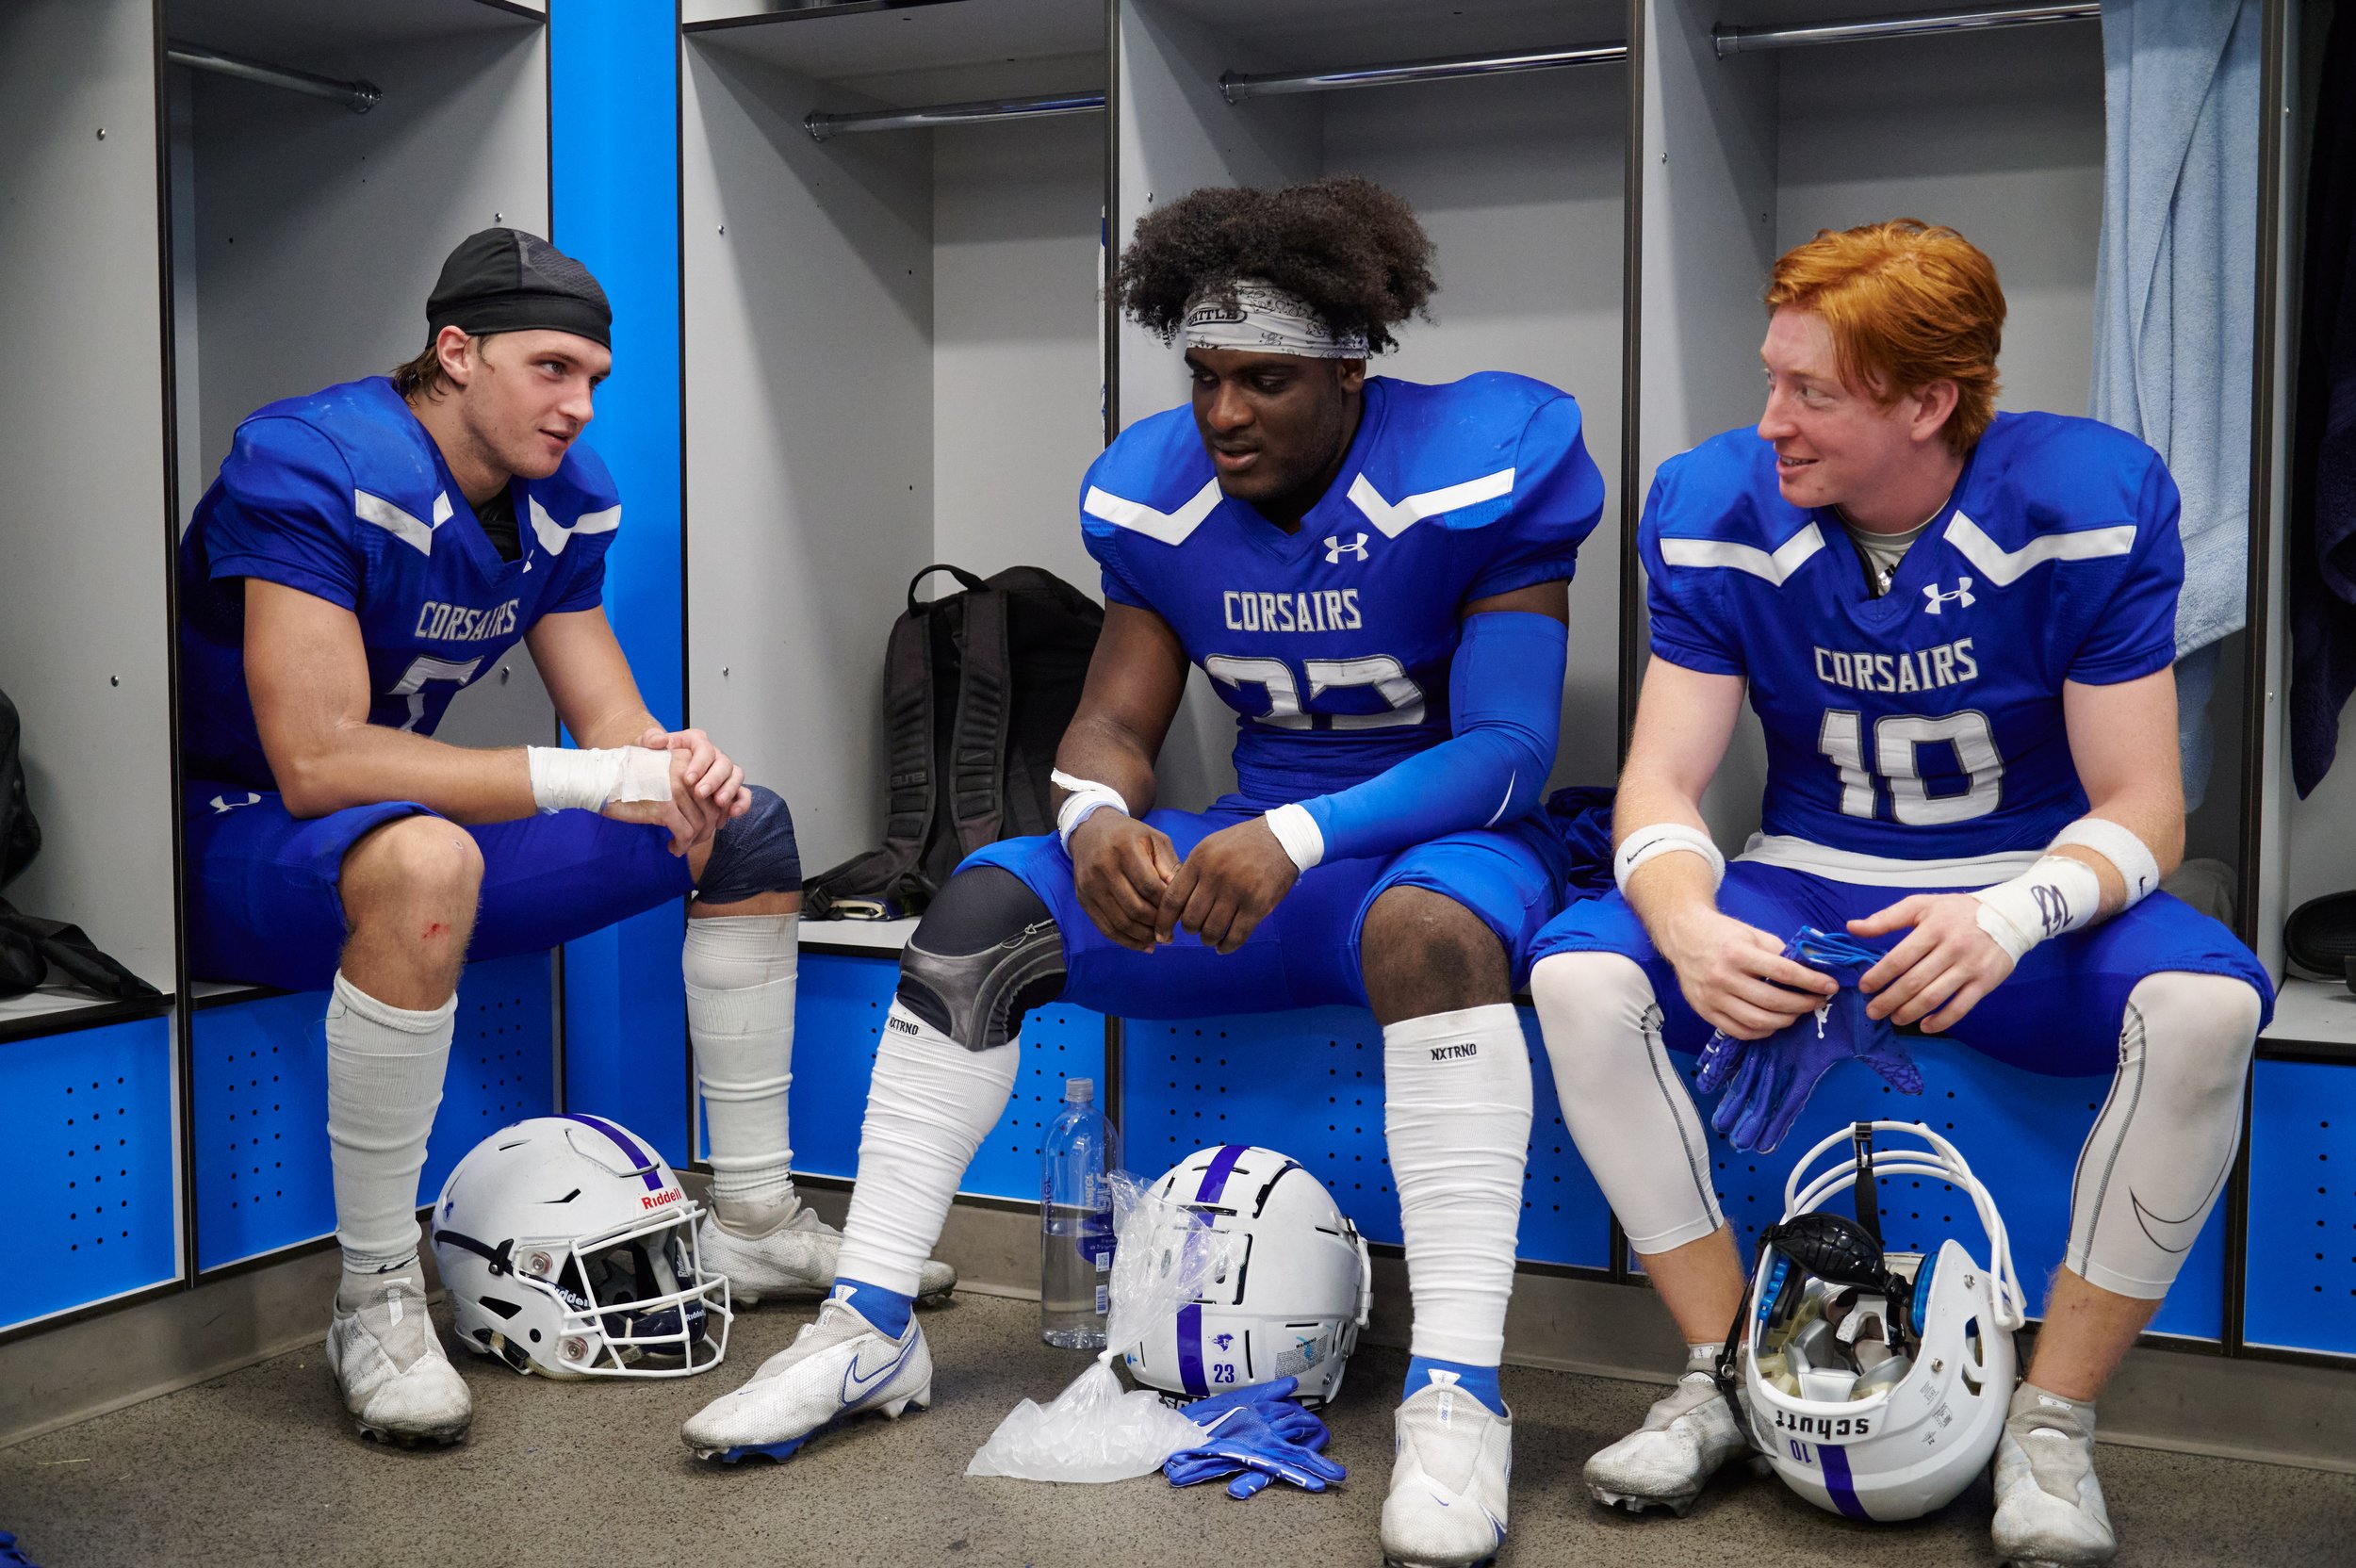  Santa Monica College Corsairs' Forrest Brock, Zaire Burks, and Levi Photenhauer in the locker room at halftime during the football match against the West Los Angeles College Wildcats on Saturday, October 1, 2022, at Corsair Field in Santa Monica, Ca